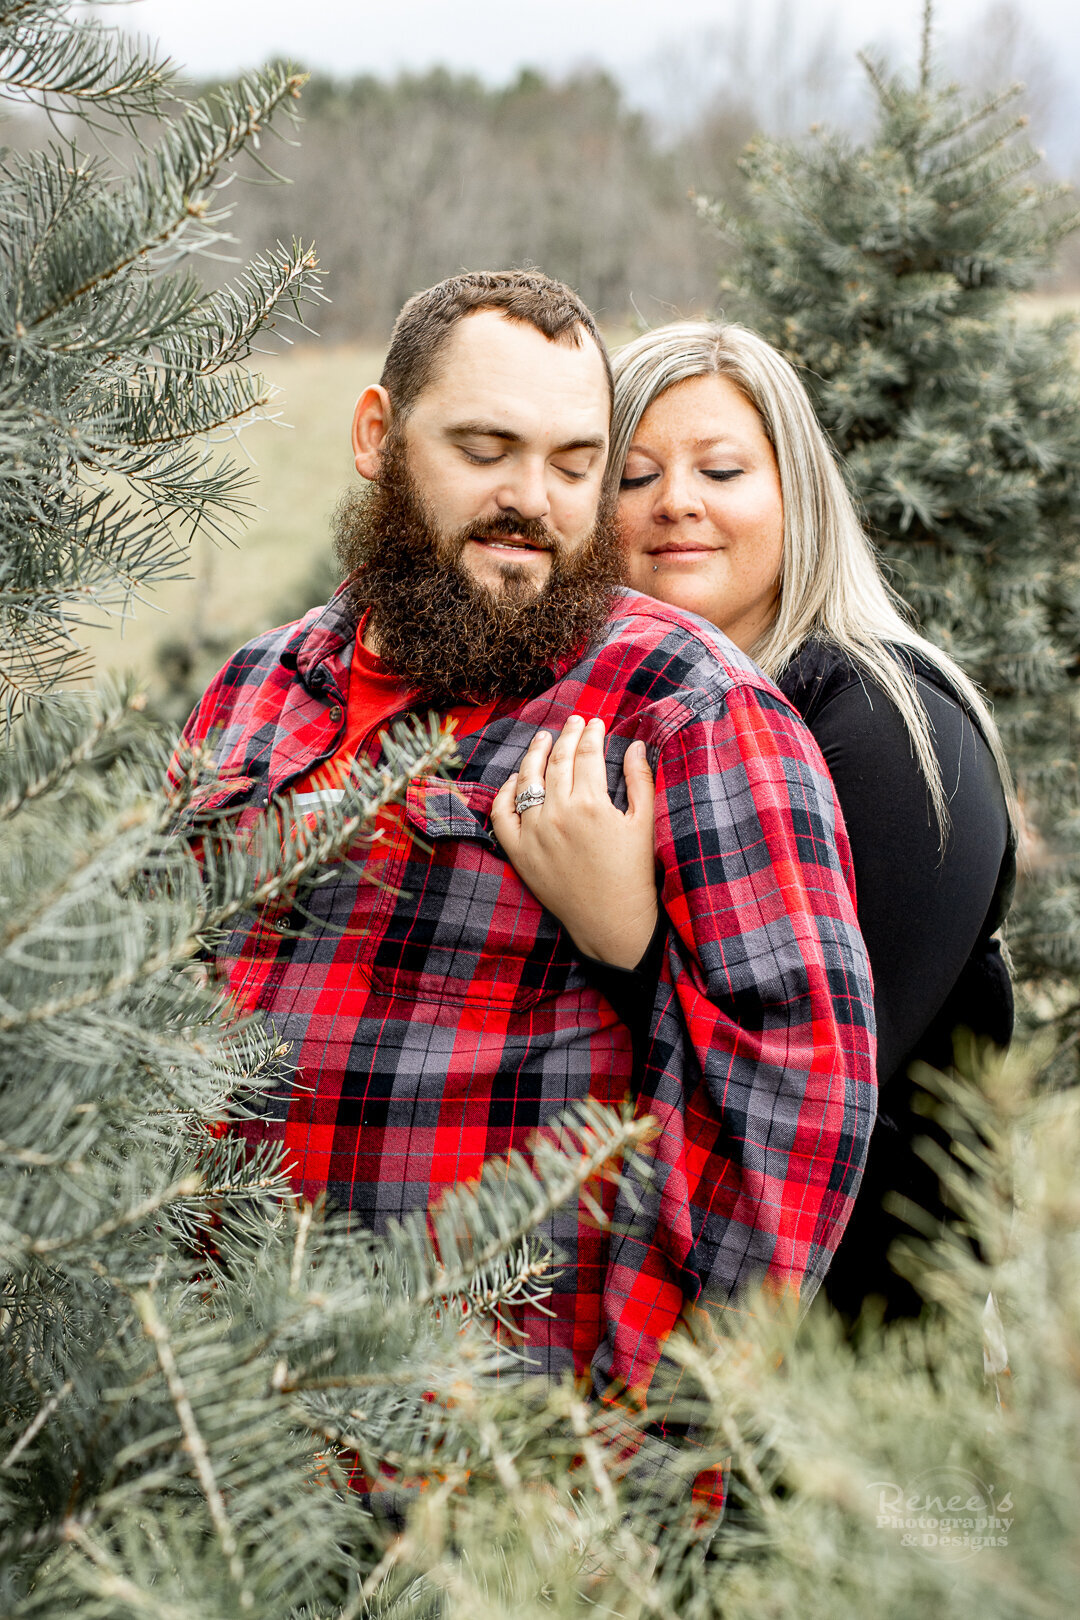 renees-photography-and-designs_christmas-tree-farm_family-children-photoshoot_new-river-valley_blue-ridge-mountains-sm-1744